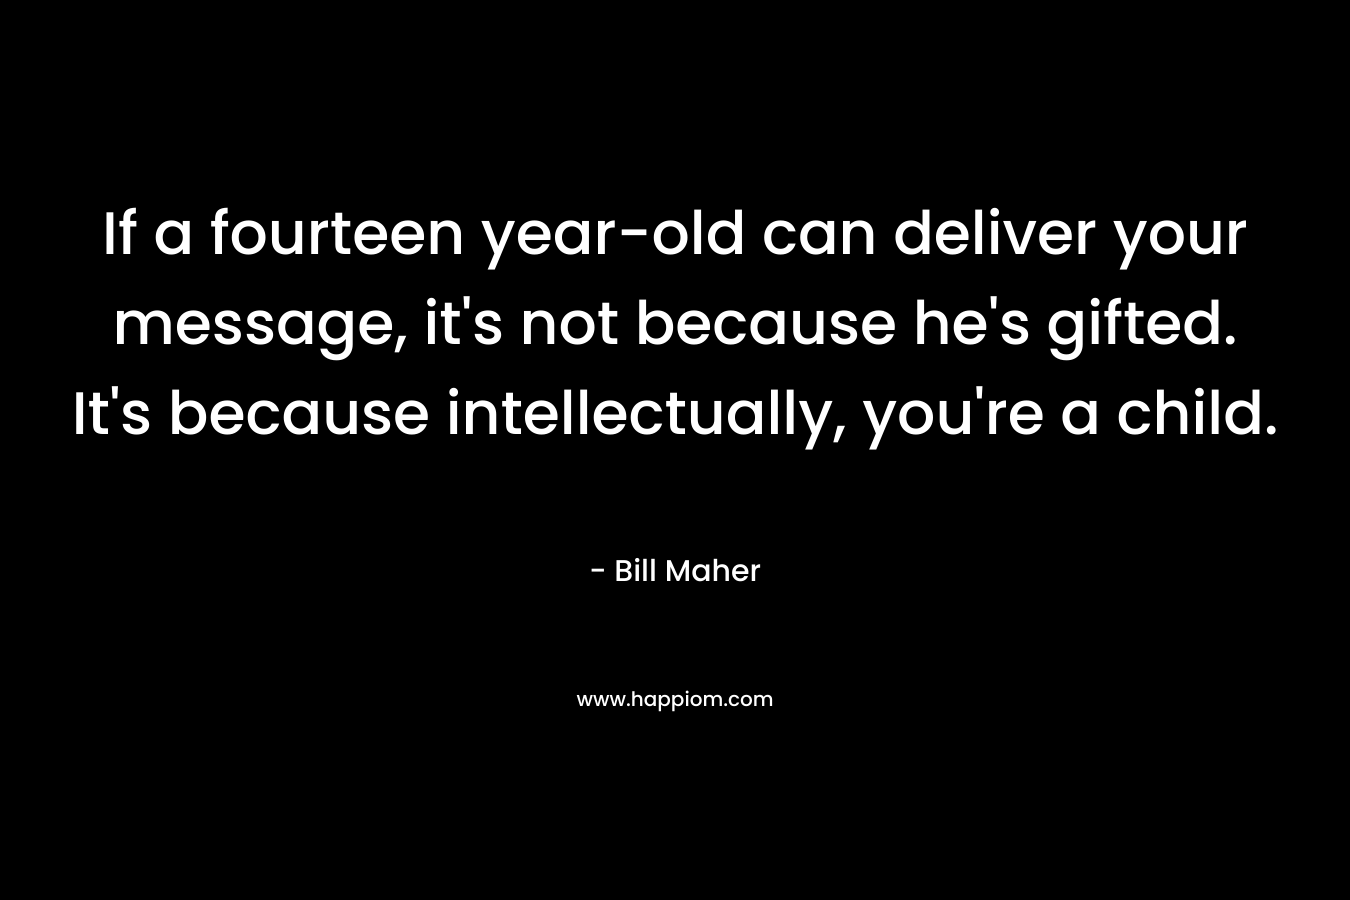 If a fourteen year-old can deliver your message, it’s not because he’s gifted. It’s because intellectually, you’re a child. – Bill Maher